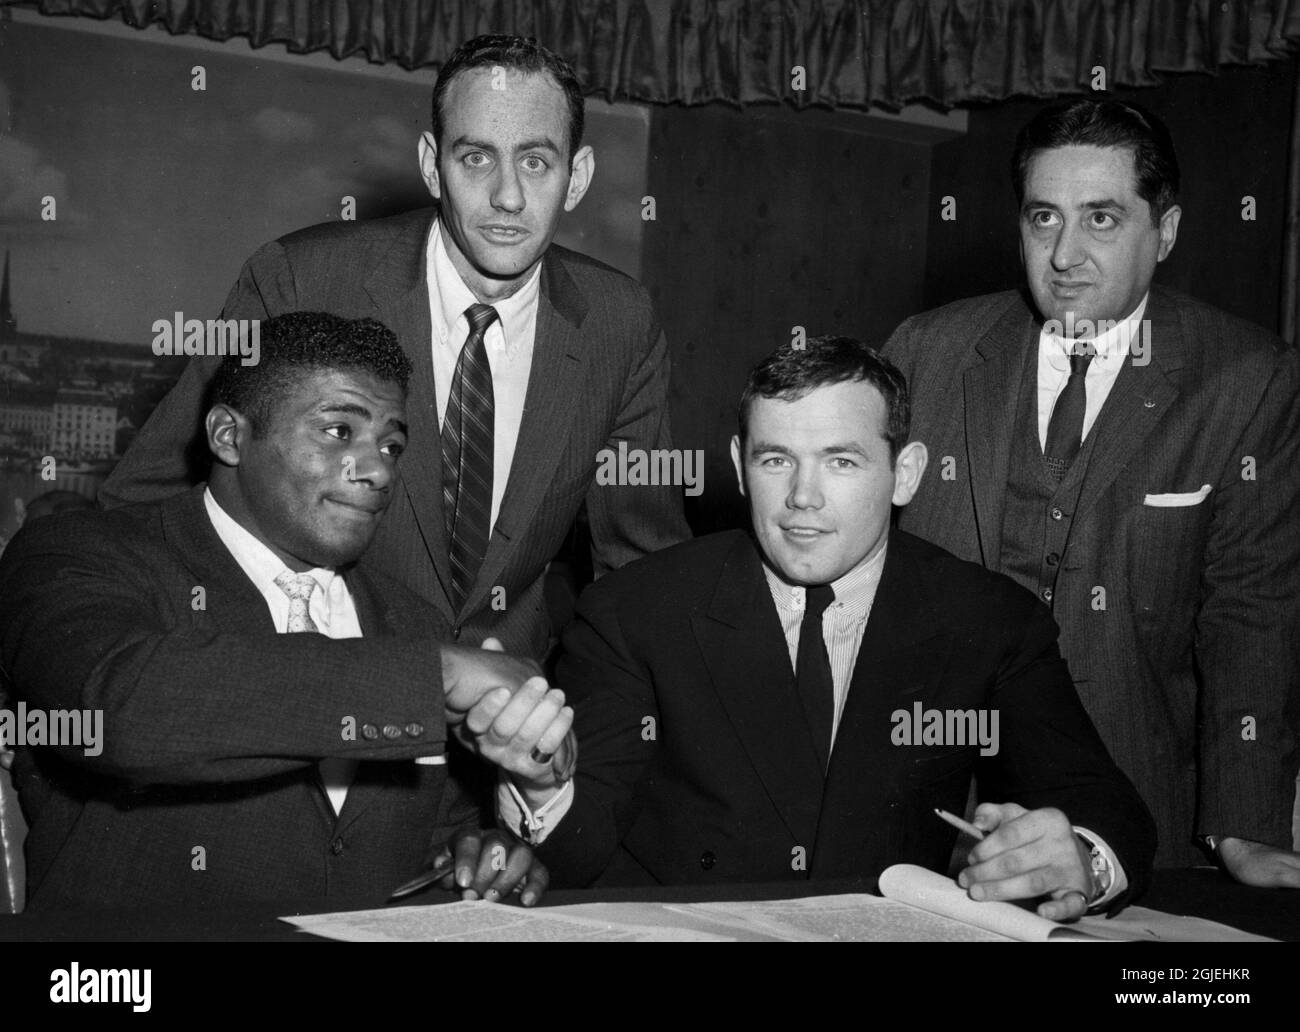 Heavyweight boxing champions Floyd Patterson and Ingemar Johansson pictured when signing the match contracts in New York in 1959. Promoters Bill Rosensohn and Vincent Velella in the back. Johansson died late Friday, January 30, 2008, at the age of 76. Johansson knocked out Floyd Patterson to win the world heavyweight title in 1959. Photo: Bonnier Archives / SCANPIX SWEDEN / Code 3001 Stock Photo